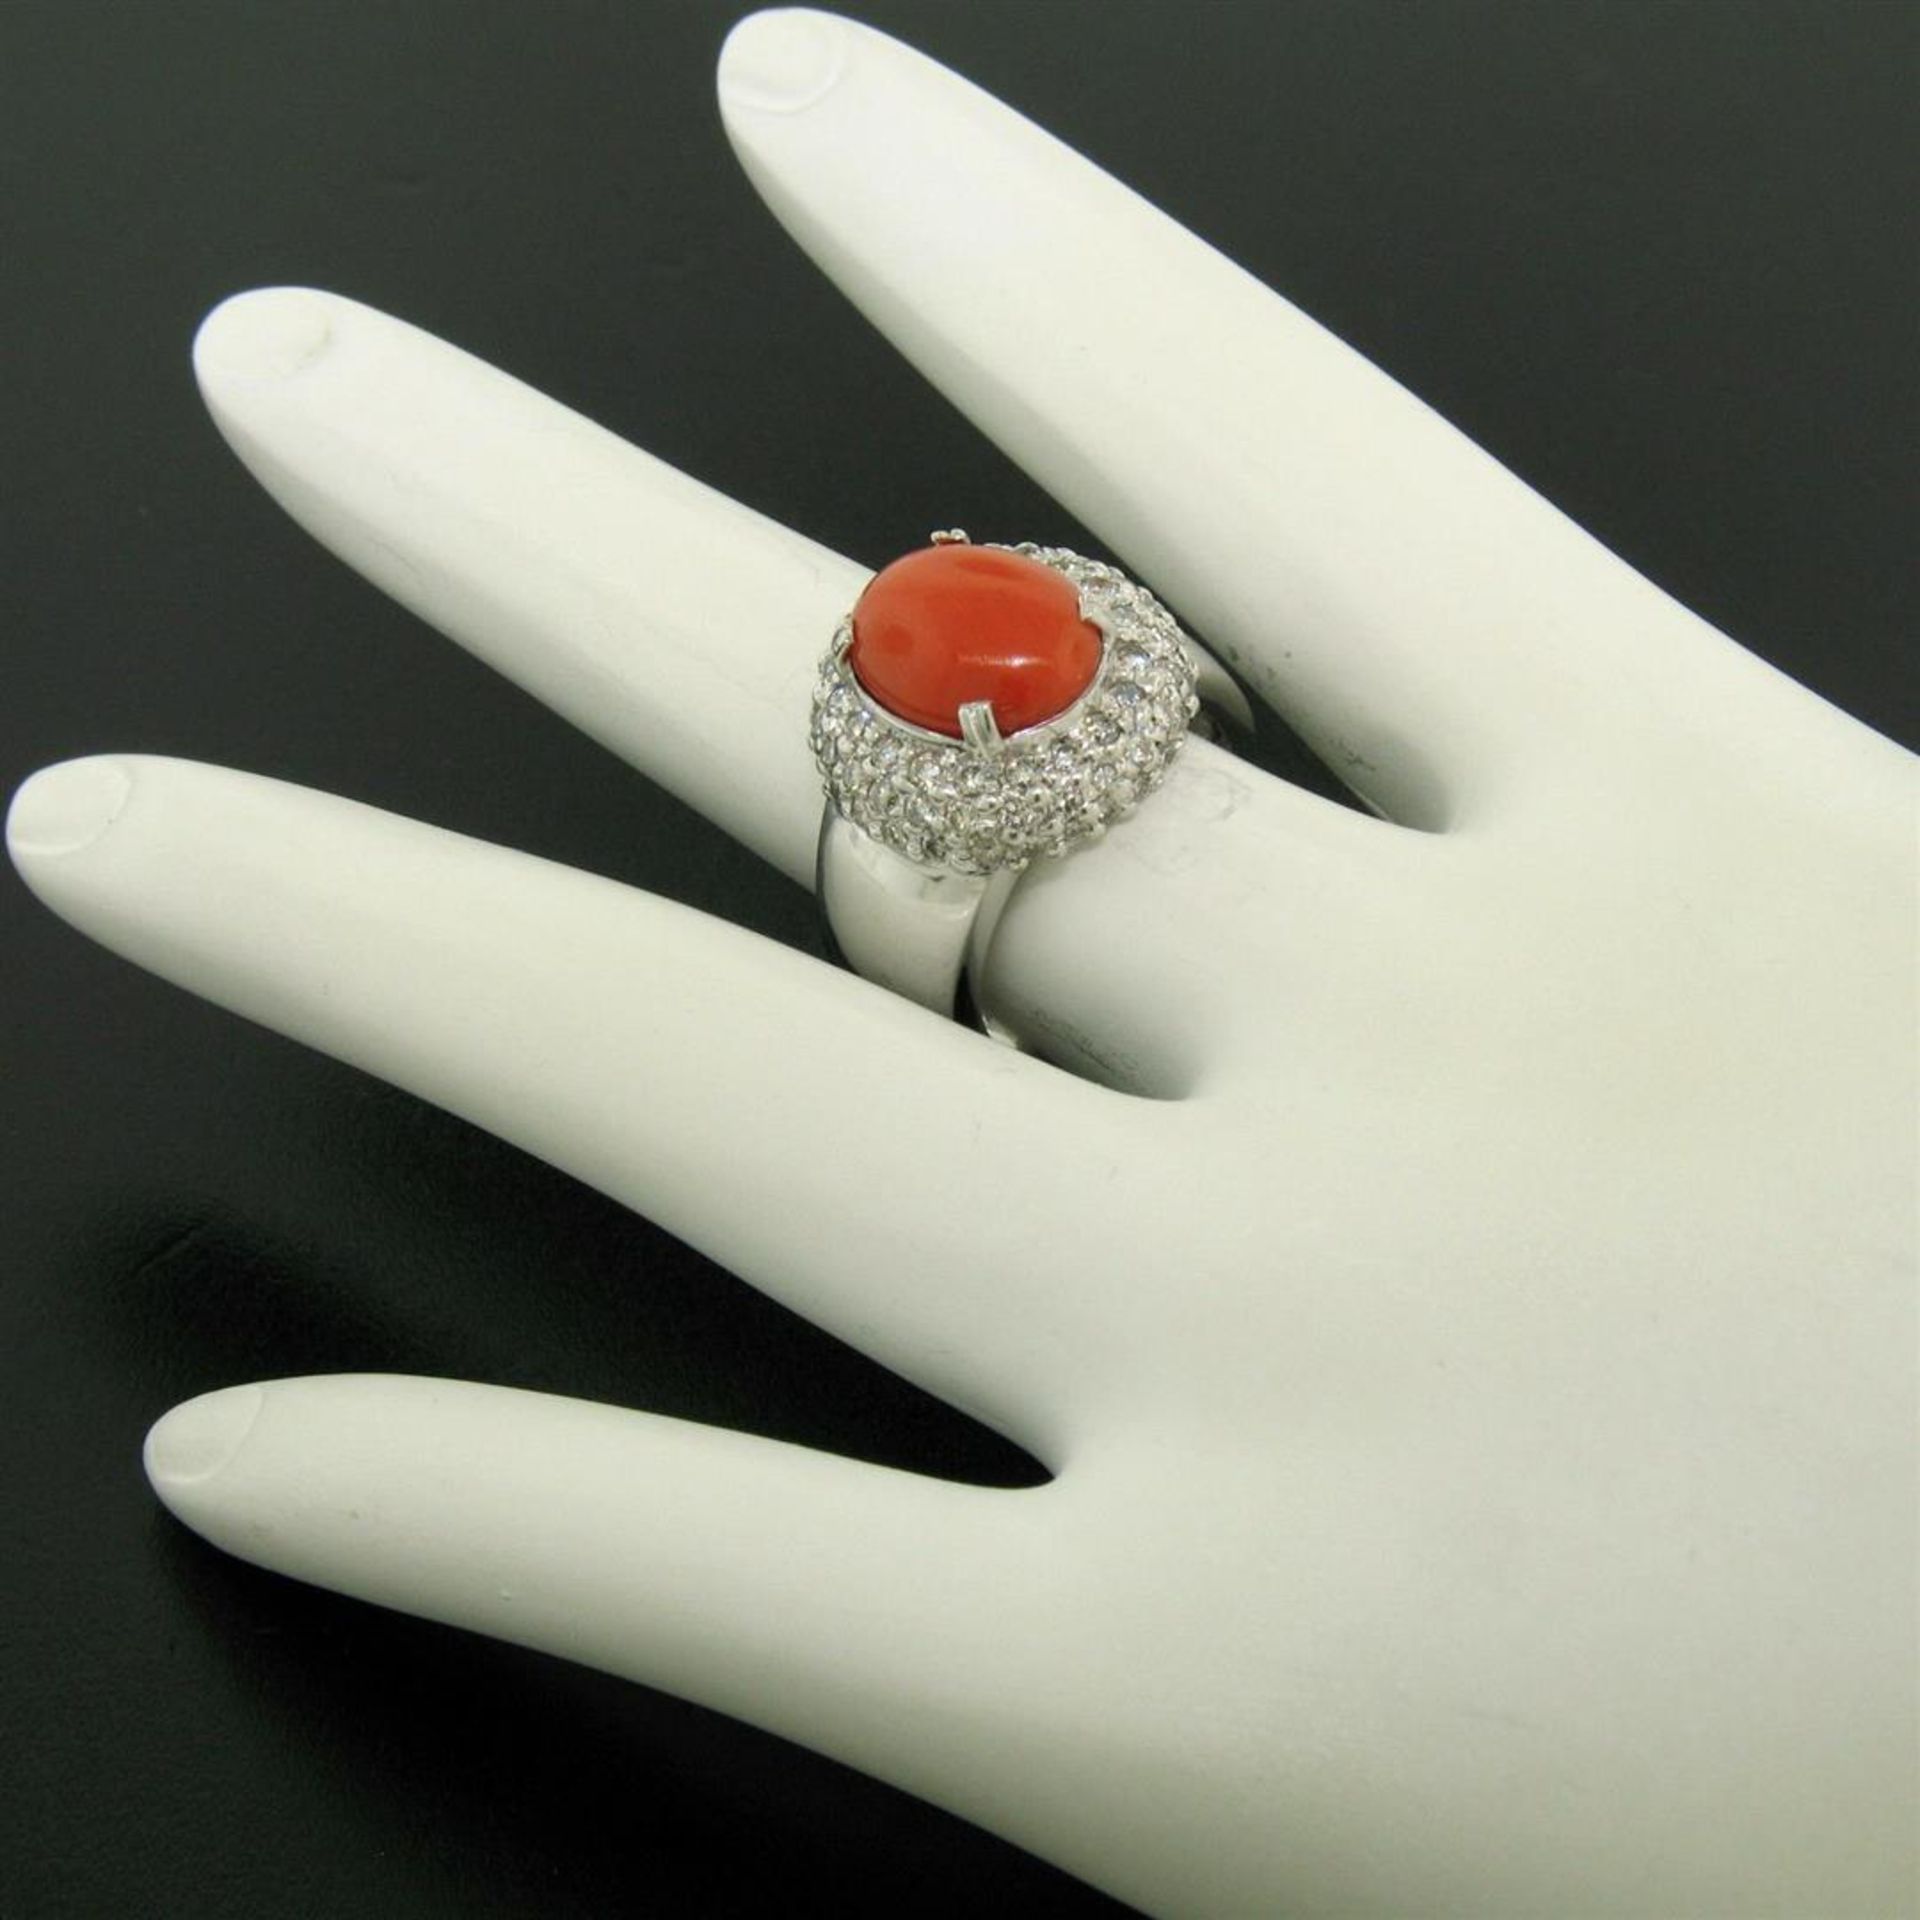 14kt White Gold Oval Cabochon Red Coral Ring w/ 2.10ctw Diamond Halo - Image 8 of 8